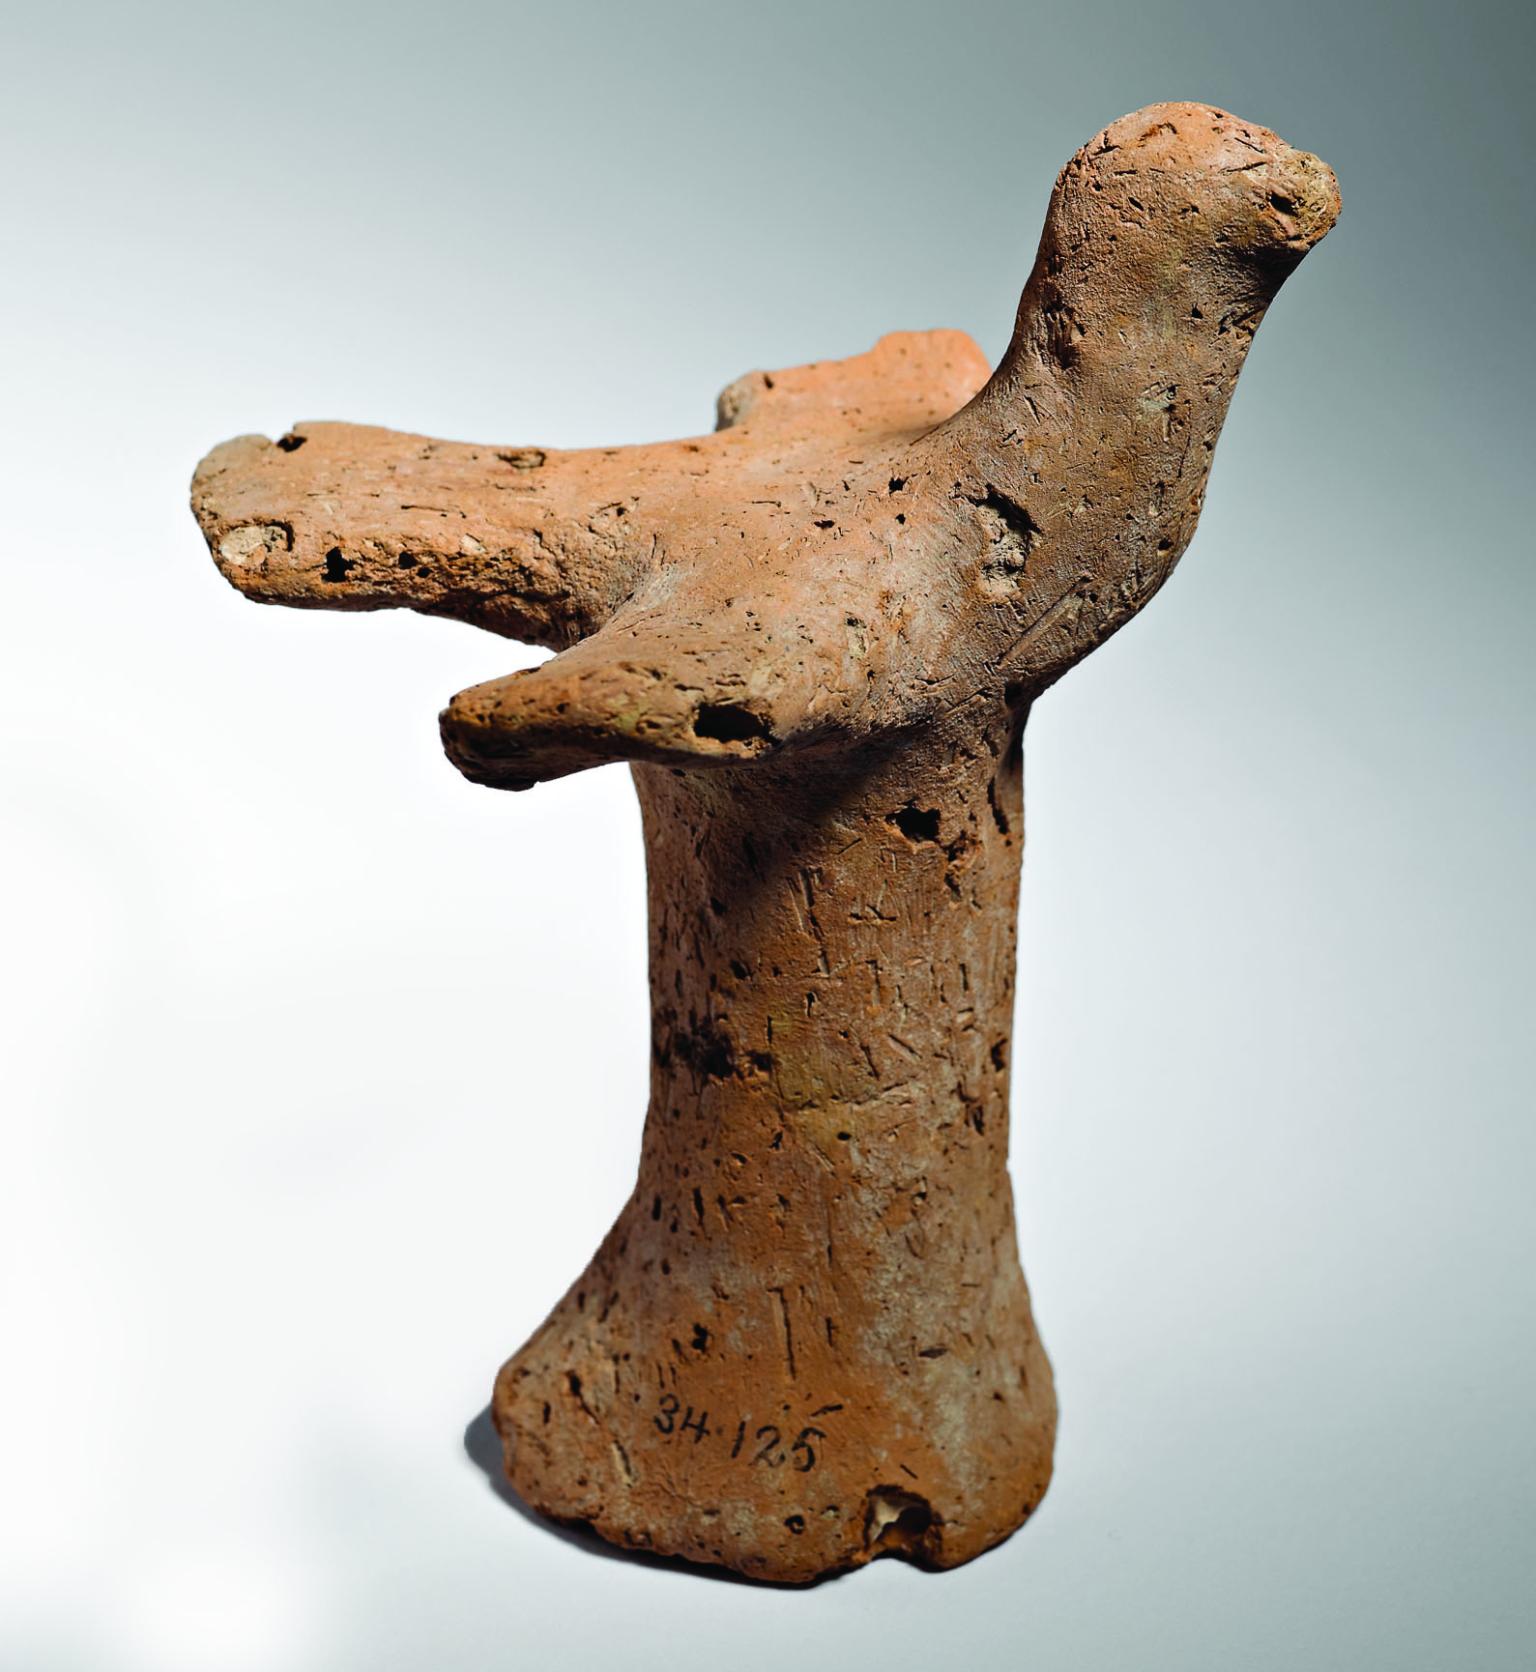 Terra-cotta bird figurine with outstretched wings on pillar.